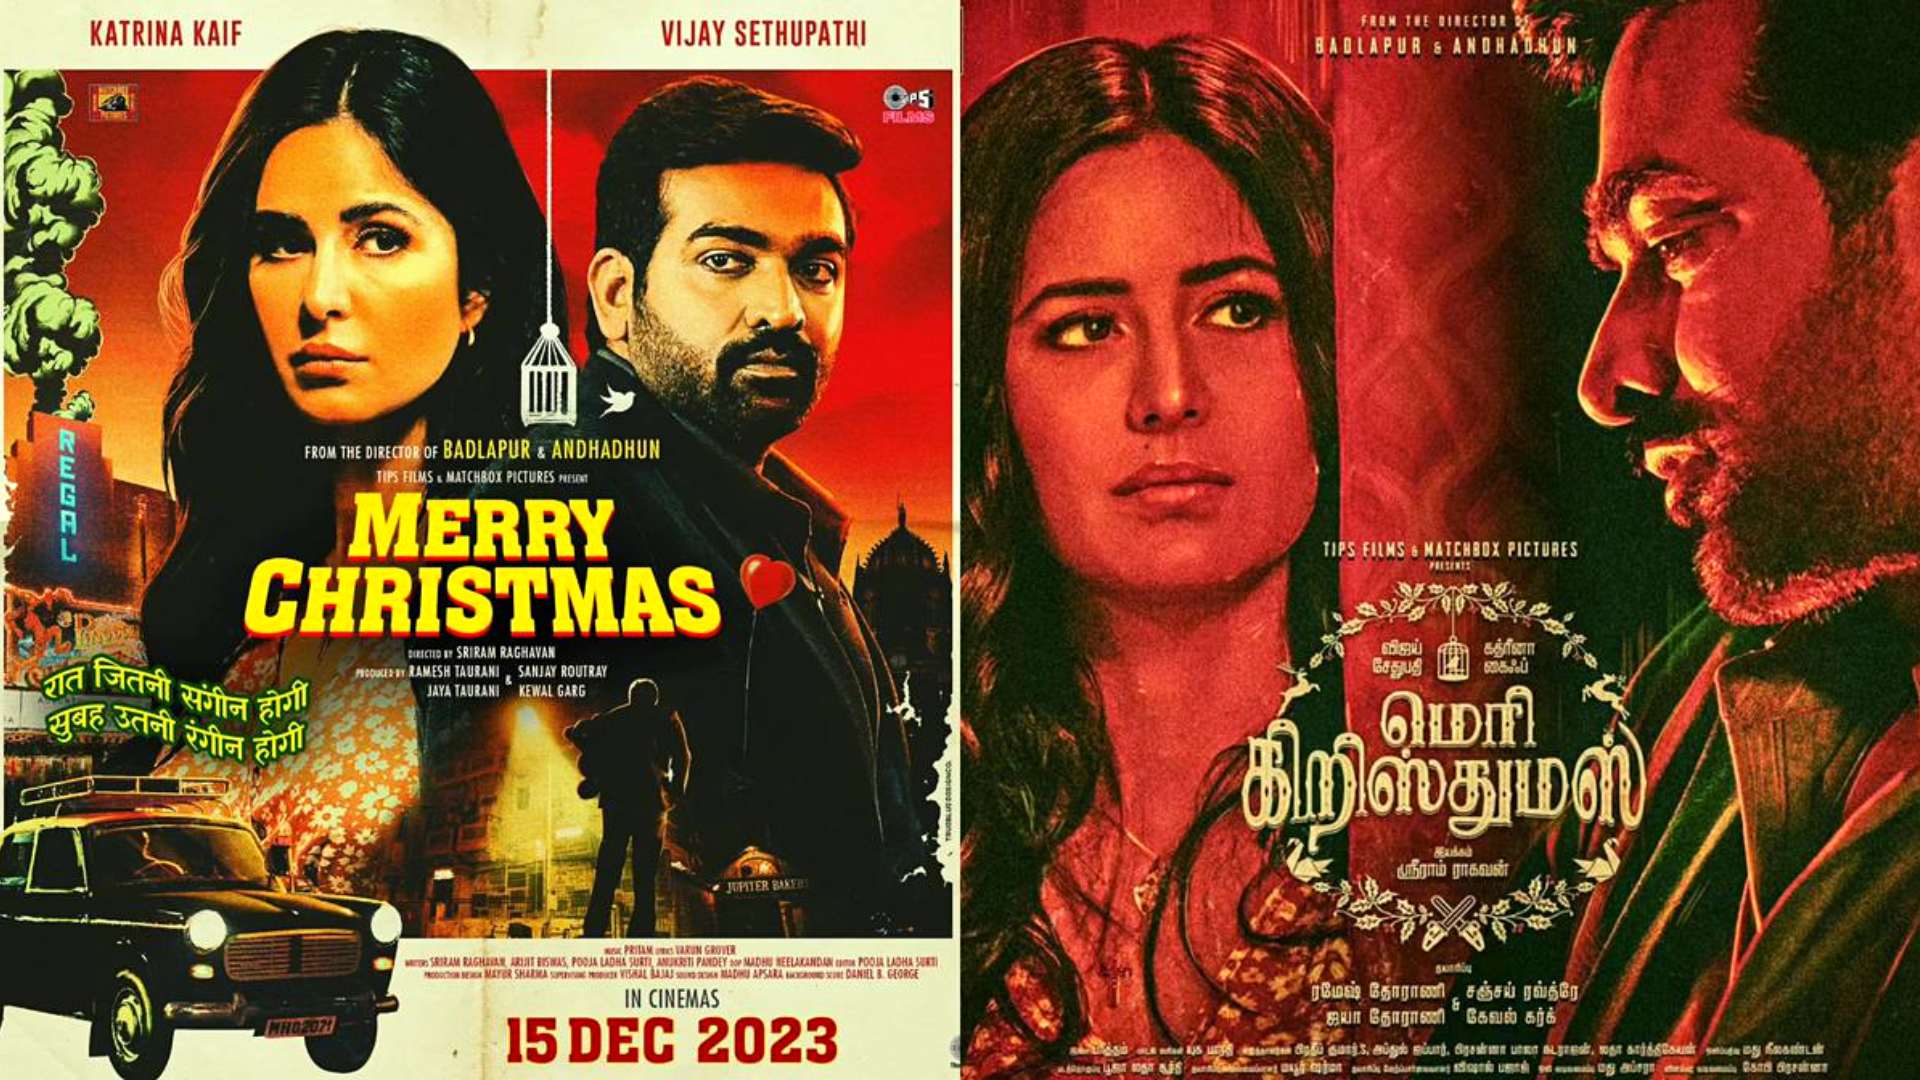 Merry Christmas Movie Ticket Offers: Give the Gift of Cinema